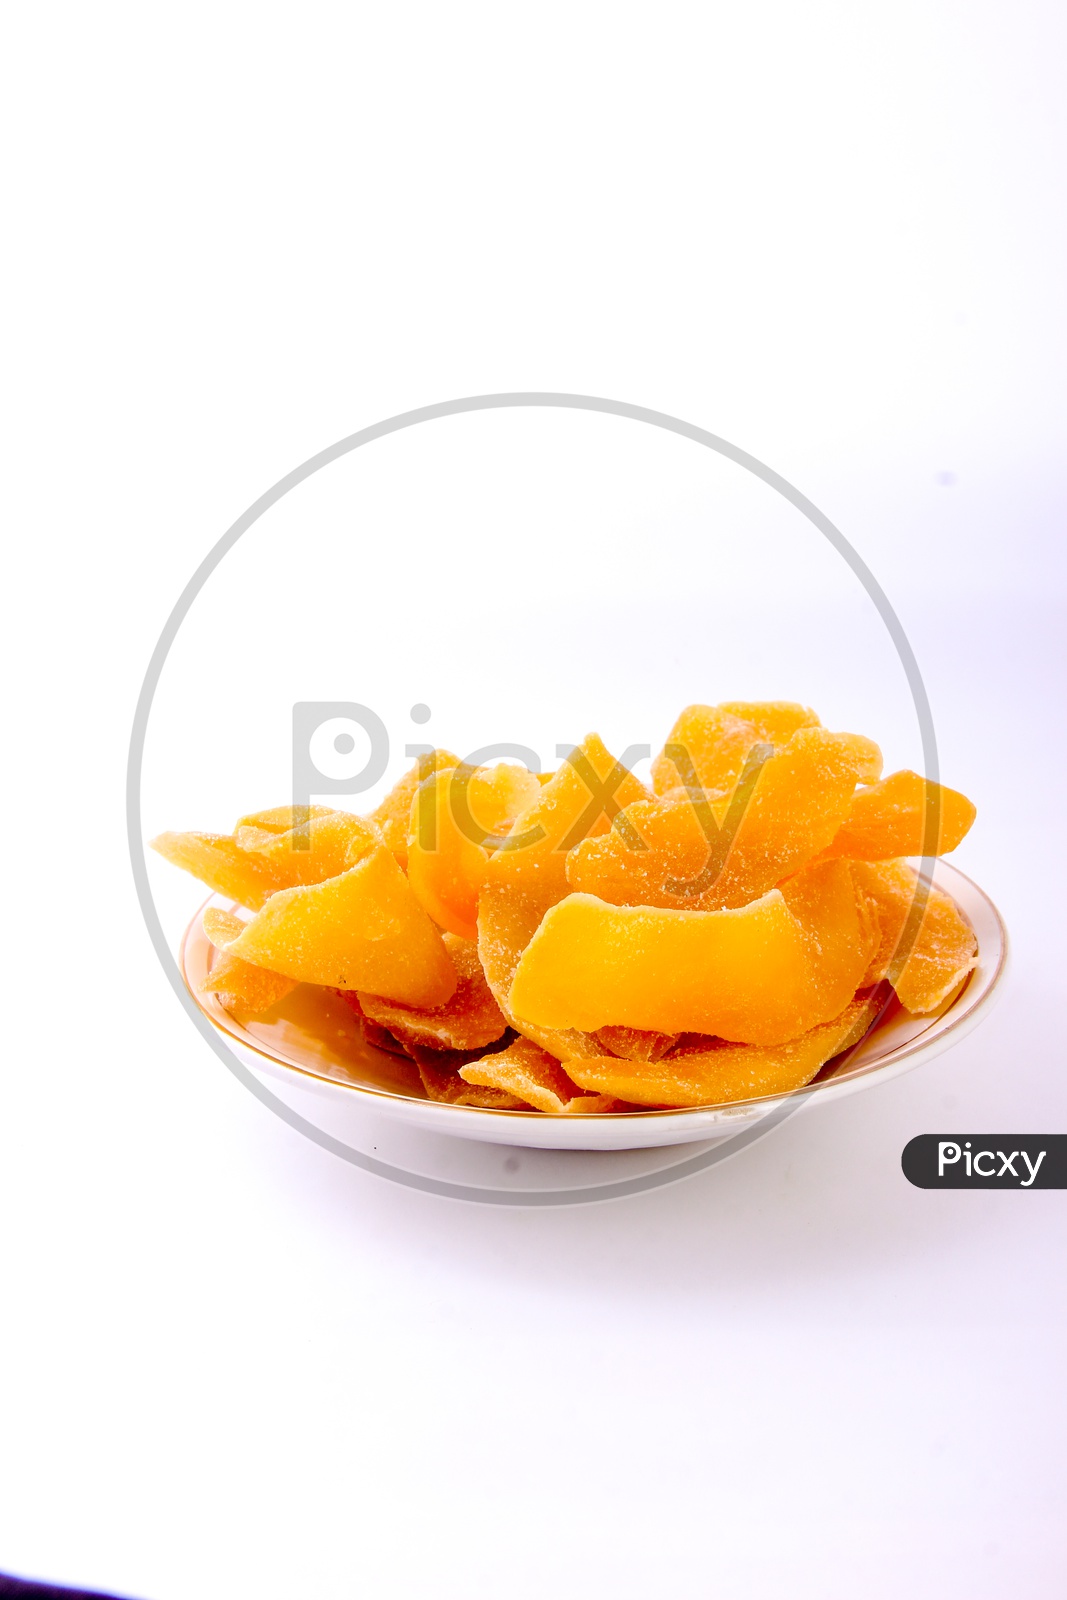 Dried Mango Slices in  a Bowl on an Isolated White Background